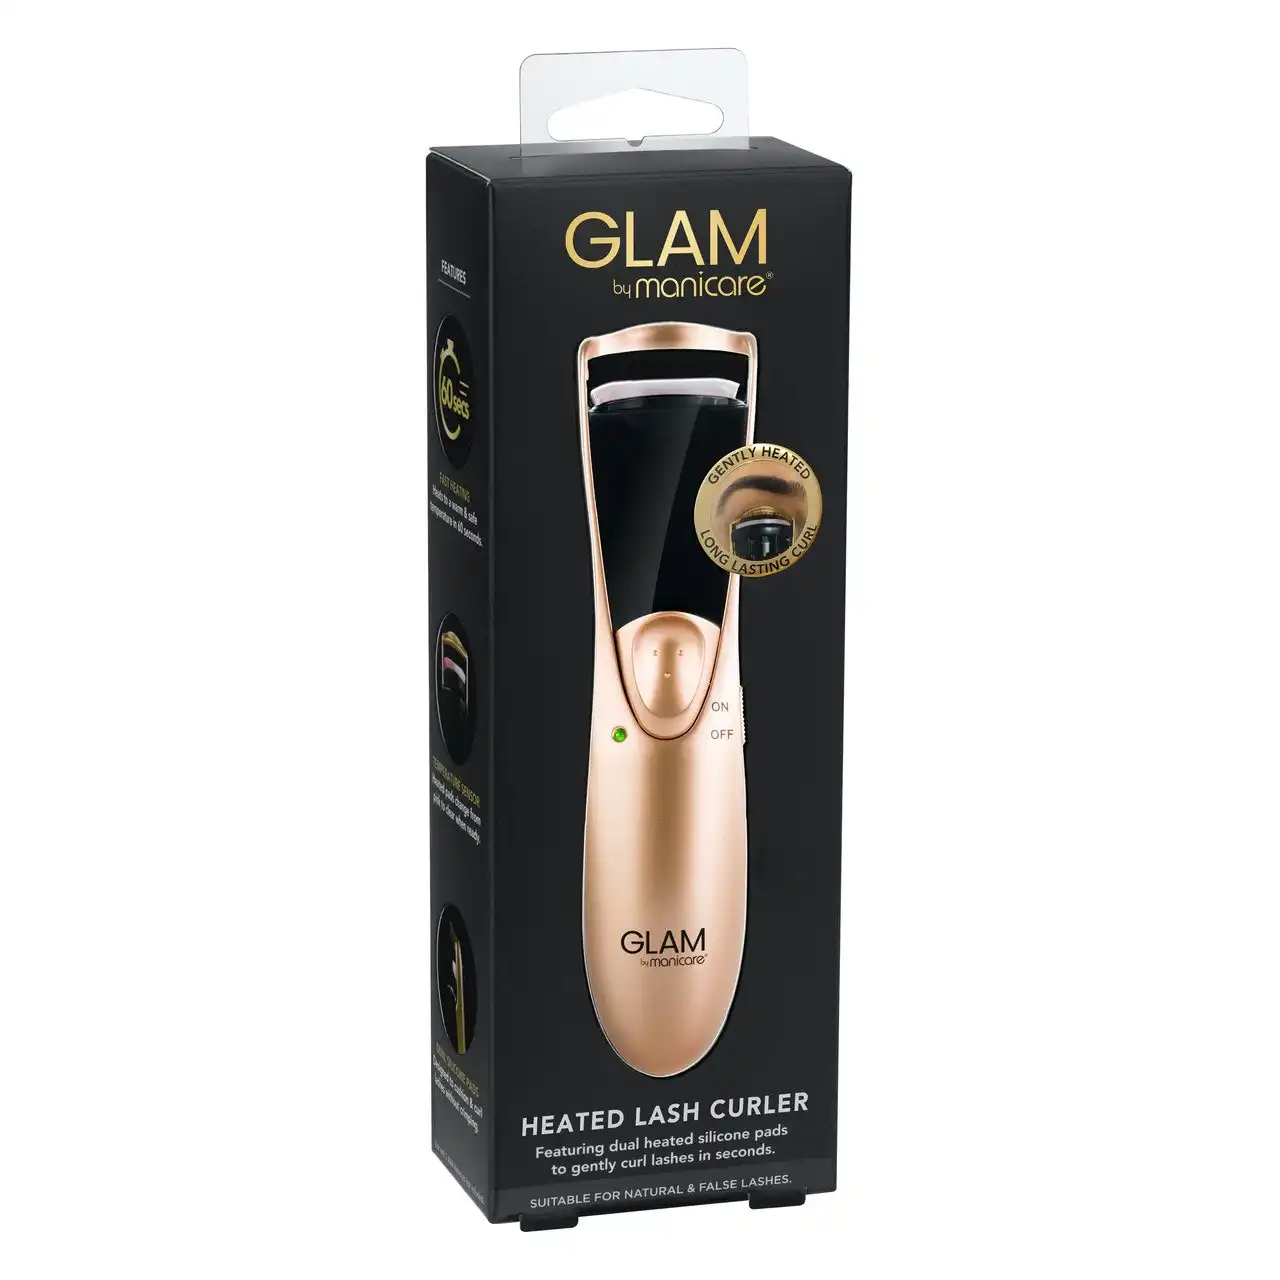 Glam by Manicare(R) Heated Lash Curler